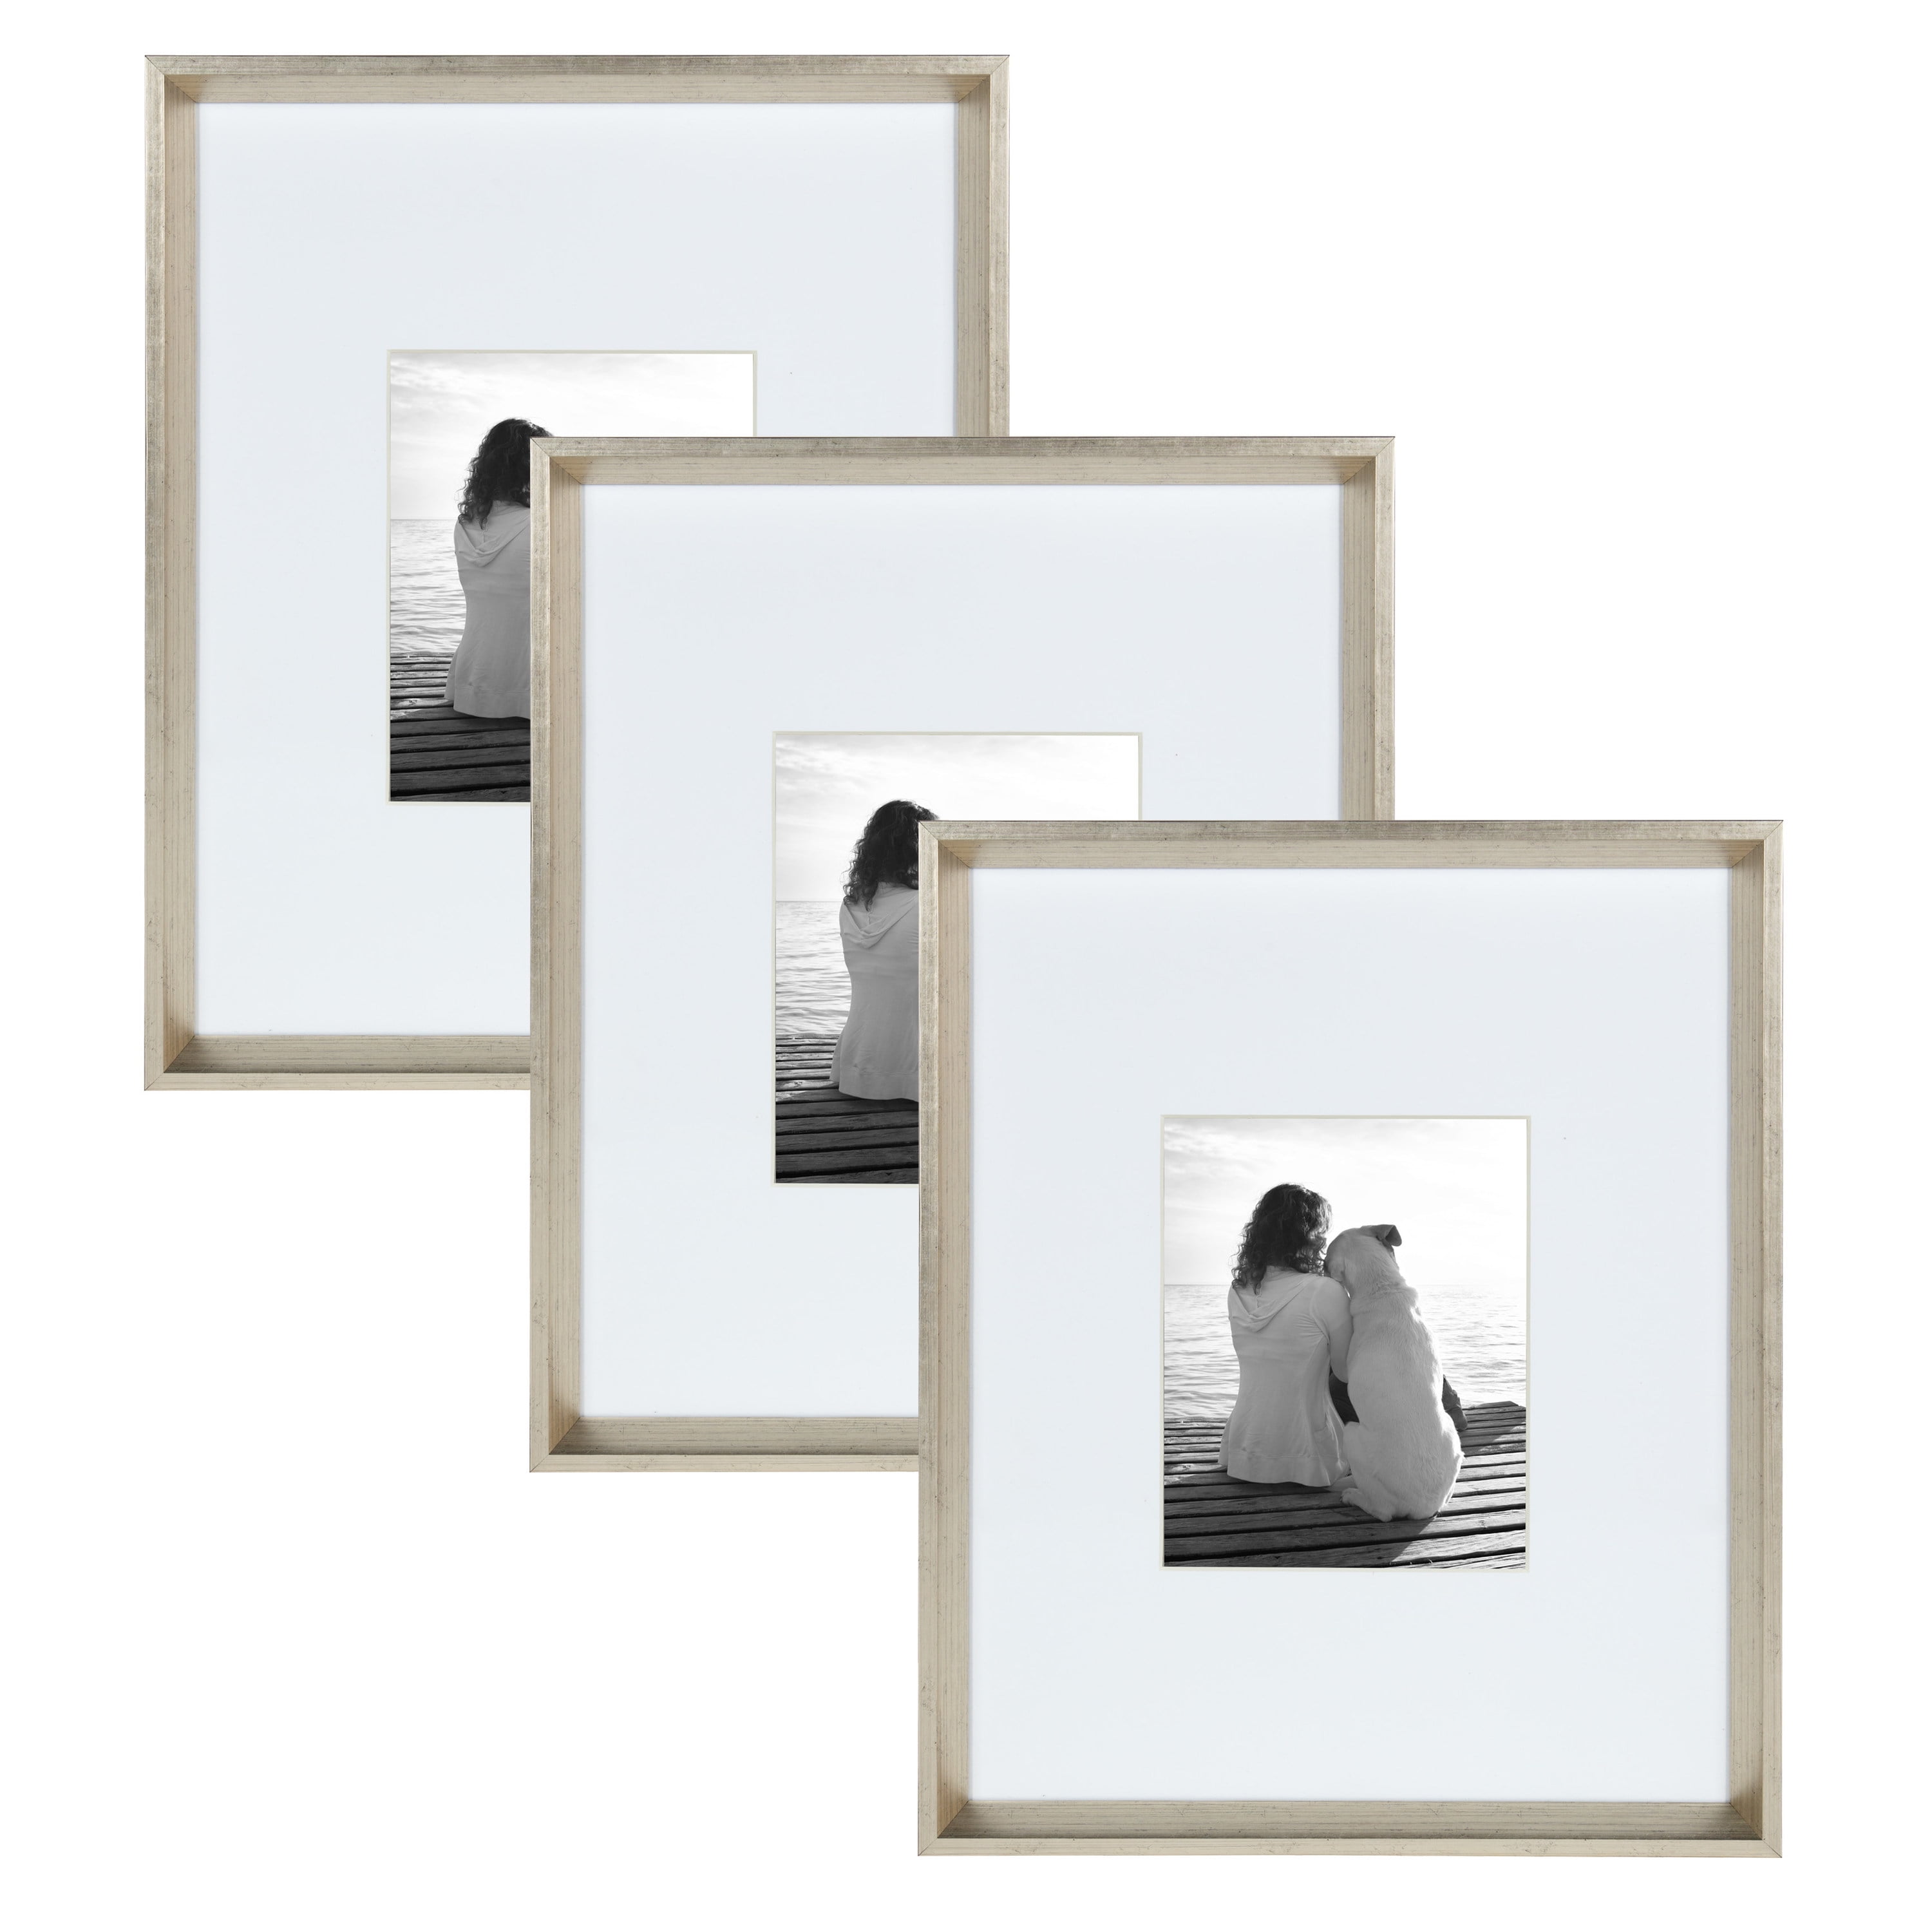 Towle Living Picture Frame Displays 8 x 10 Photos 16 x 20 Without Mat,  16x20-Matted 8x10, Gray